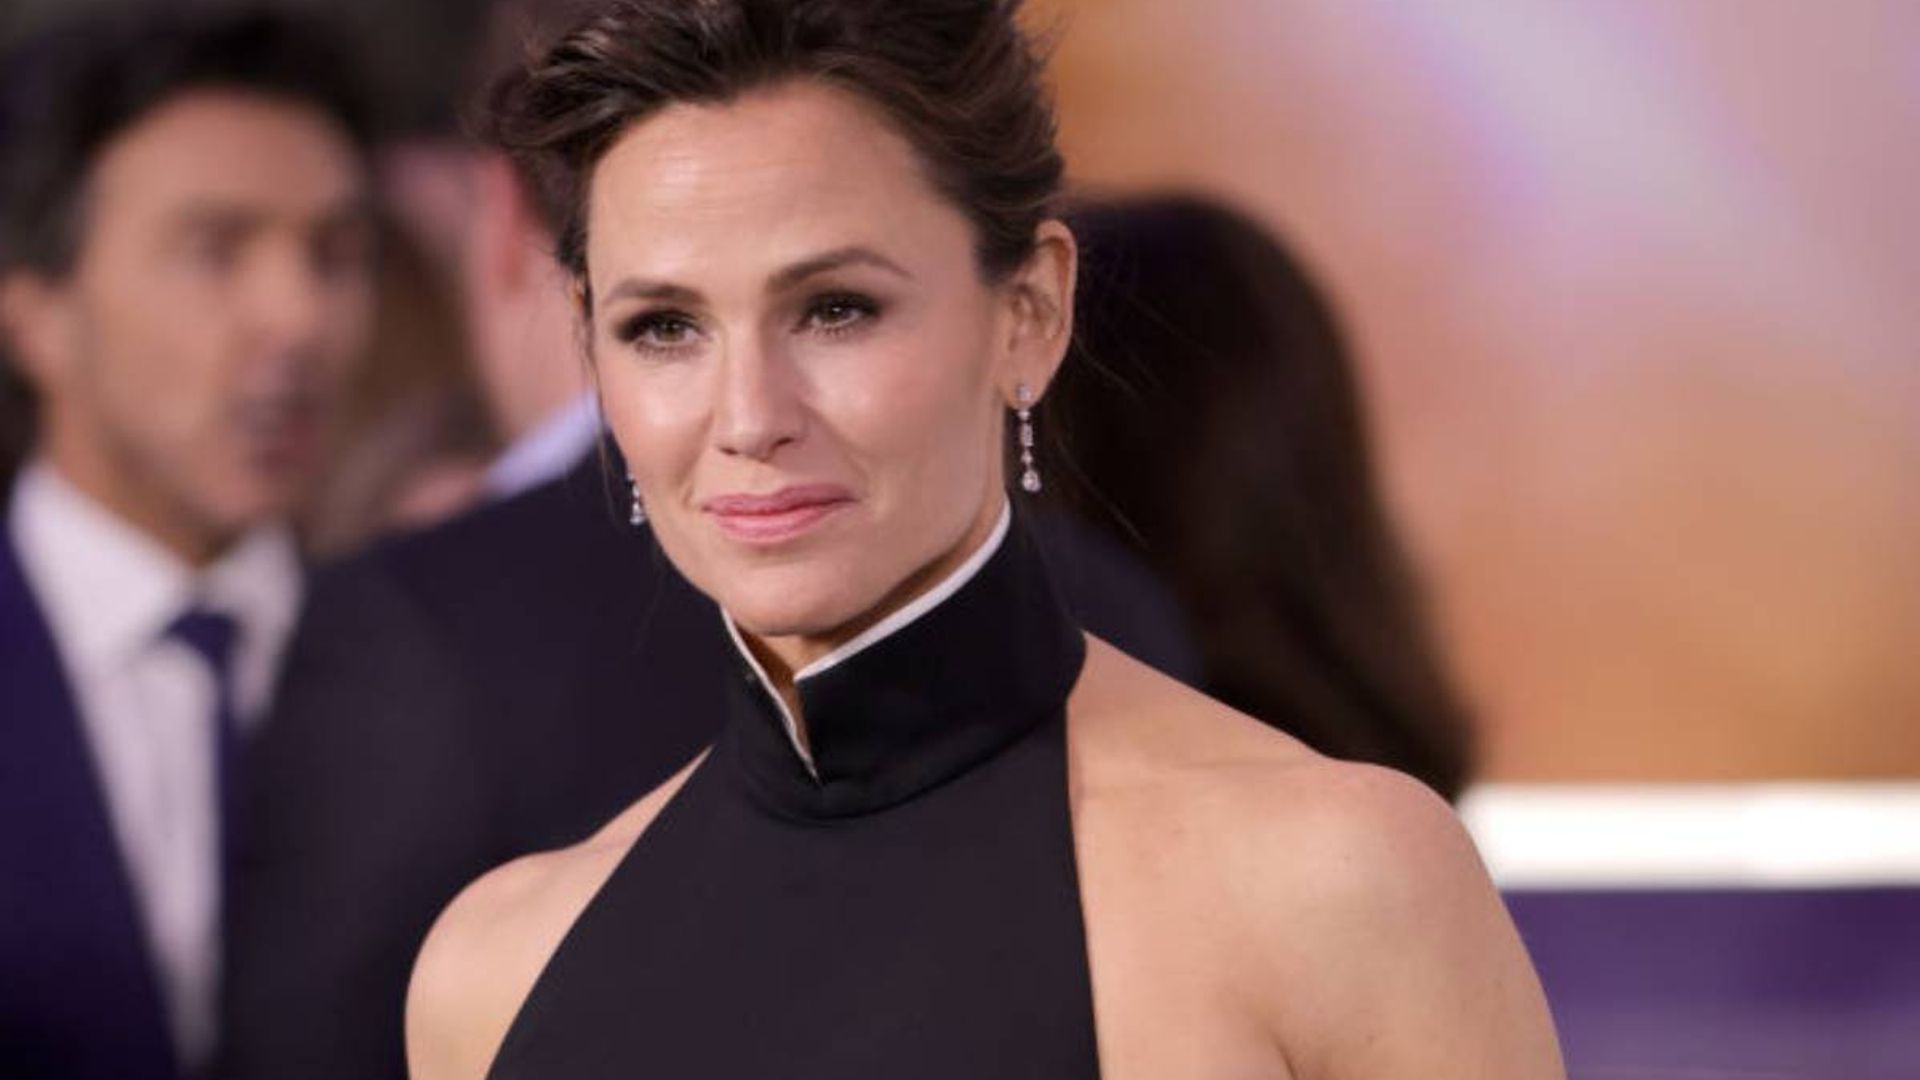 Jennifer Garner struts her stuff in just a shirt in new video you have to see